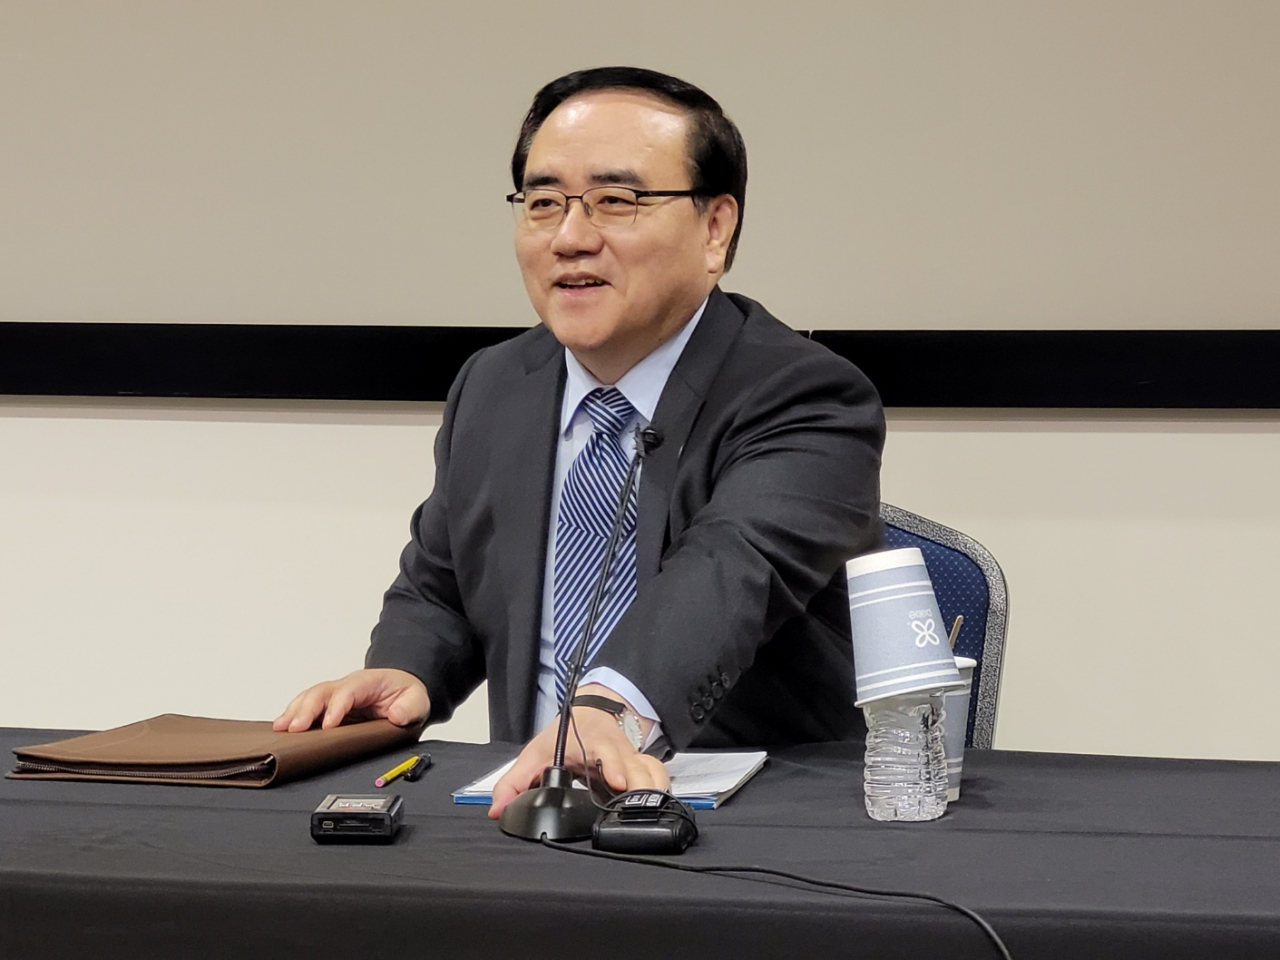 National Security Adviser Kim Sung-han, who visits the US, has a press meeting at the Korean Cultural Center in Washington, D.C. on March 7. (Yonhap)